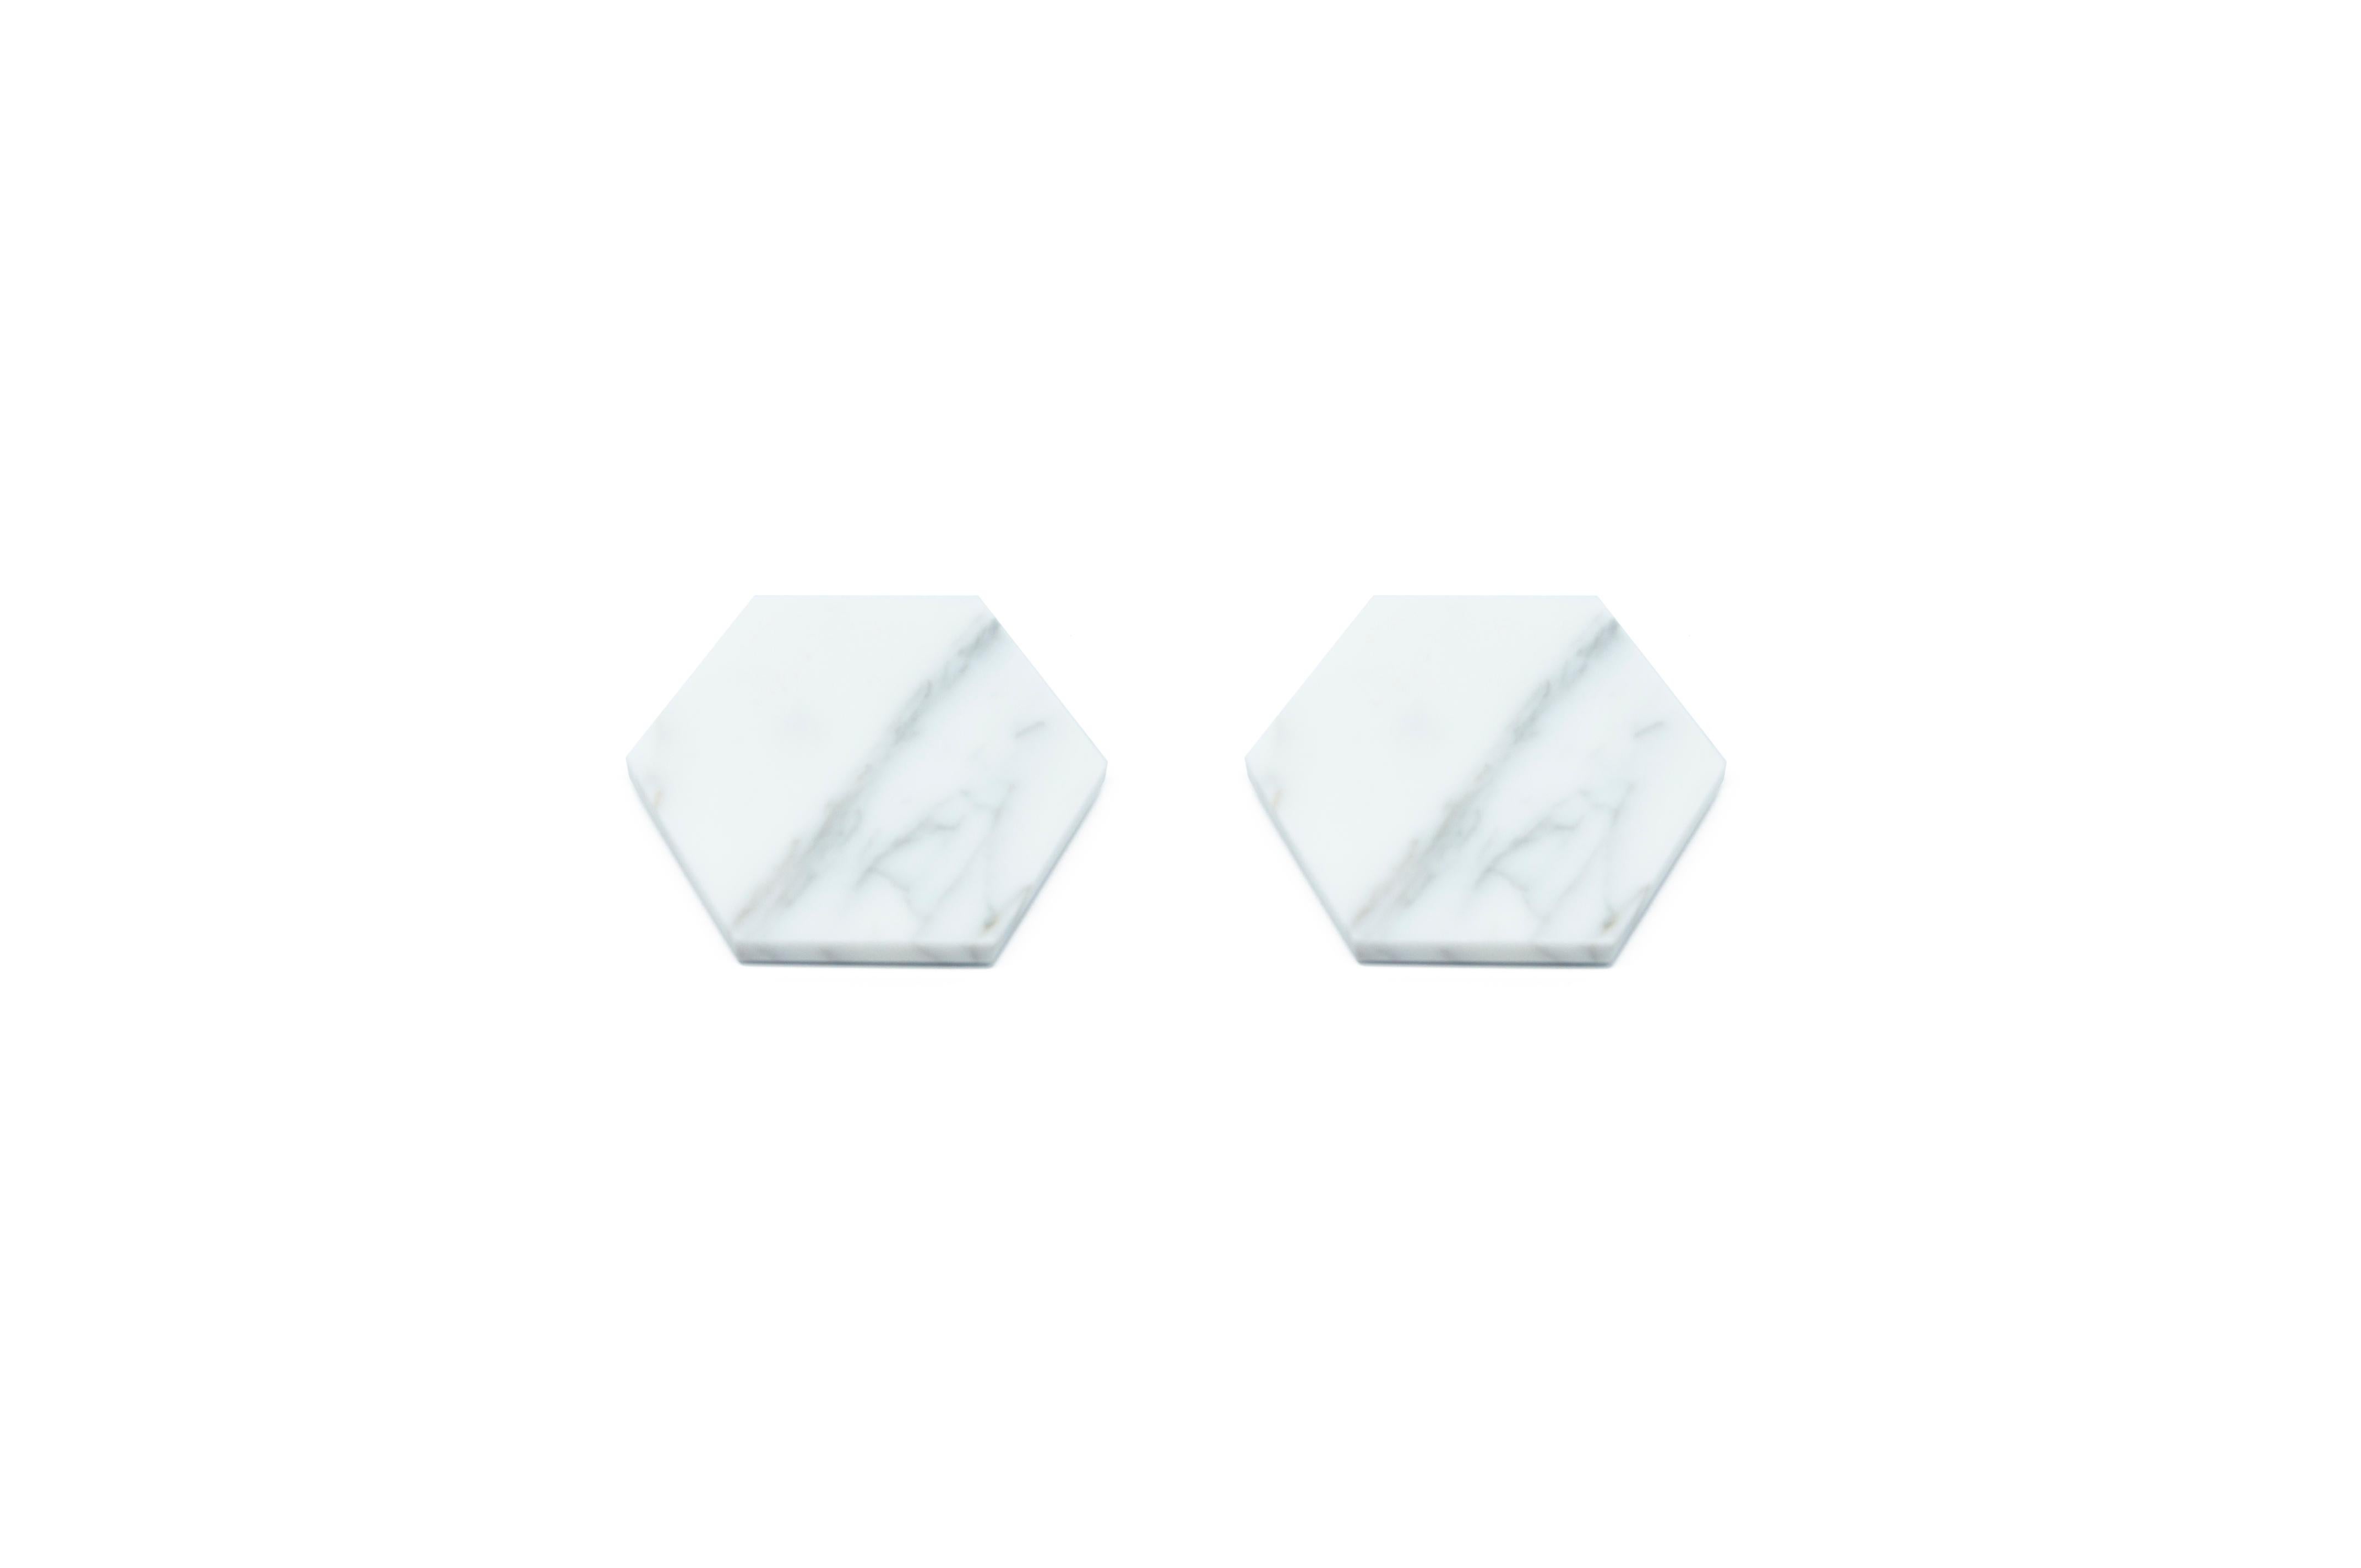 Set of 2 hexagonal white Carrara marble coasters with cork underneath. Each piece is in a way unique (every marble block is different in veins and shades) and handmade by Italian artisans specialized over generations in processing marble. Slight